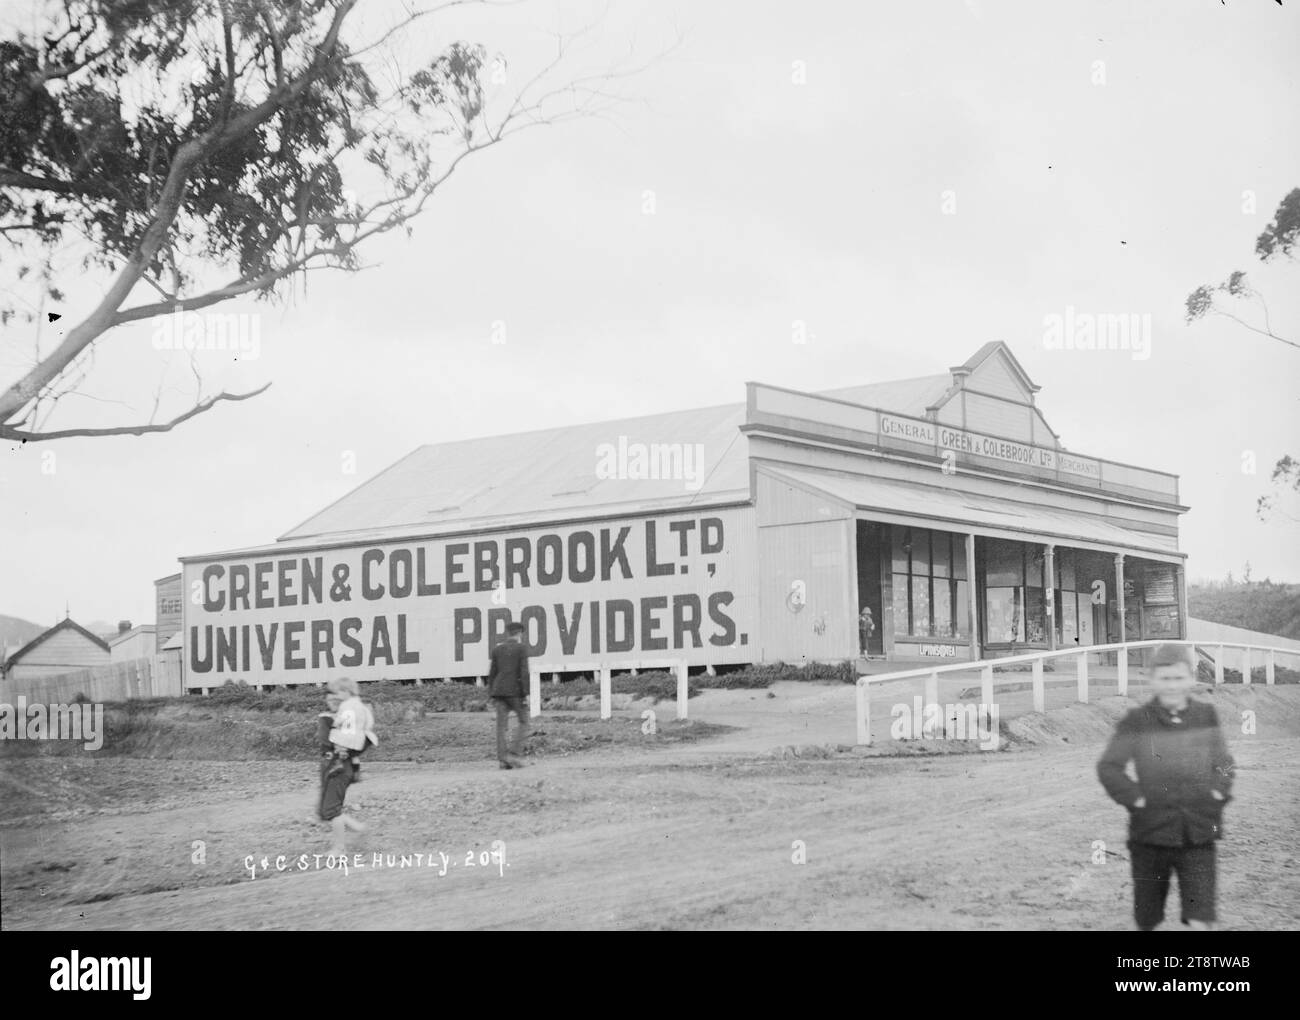 Green & Colebrook's store at Huntly, ca 1910s, The business premises of Green & Colebrook, merchants in Huntly, with the sign 'Universal providers' on the side of the building. circa 1910s Stock Photo